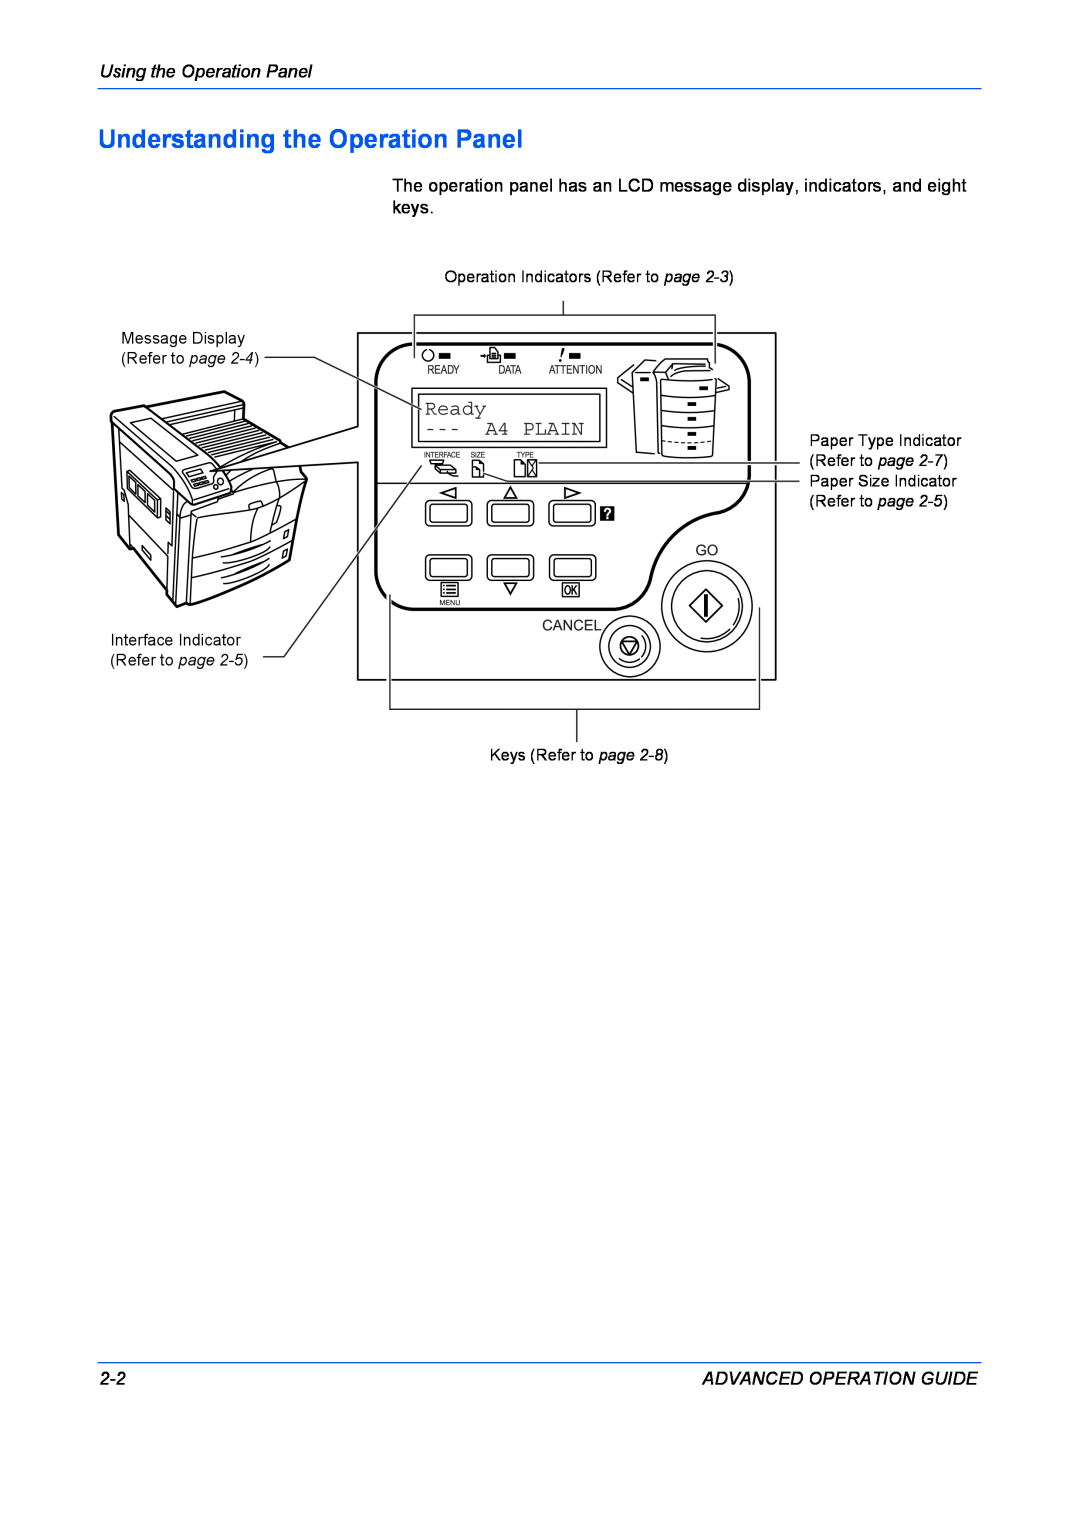 Kyocera 9530DN Understanding the Operation Panel, Ready A4 PLAIN, Operation Indicators Refer to page, Keys Refer to page 